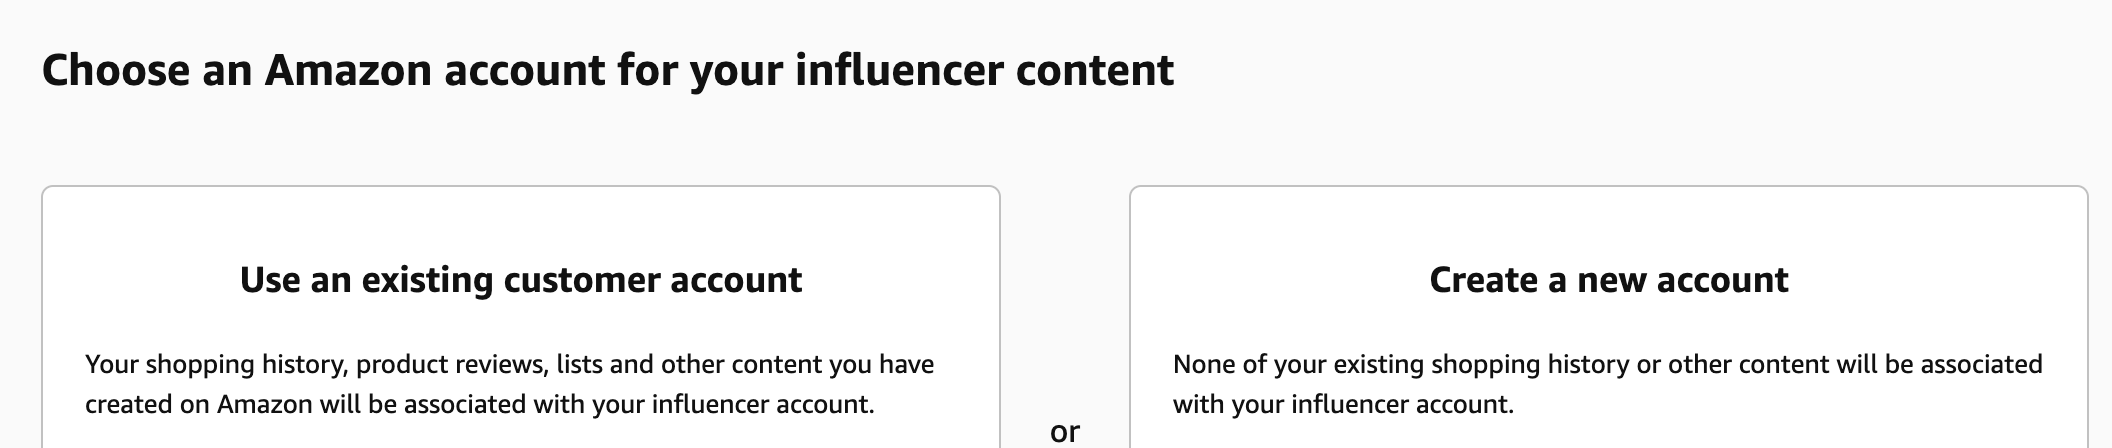 Choose an Amazon account for your influencer content